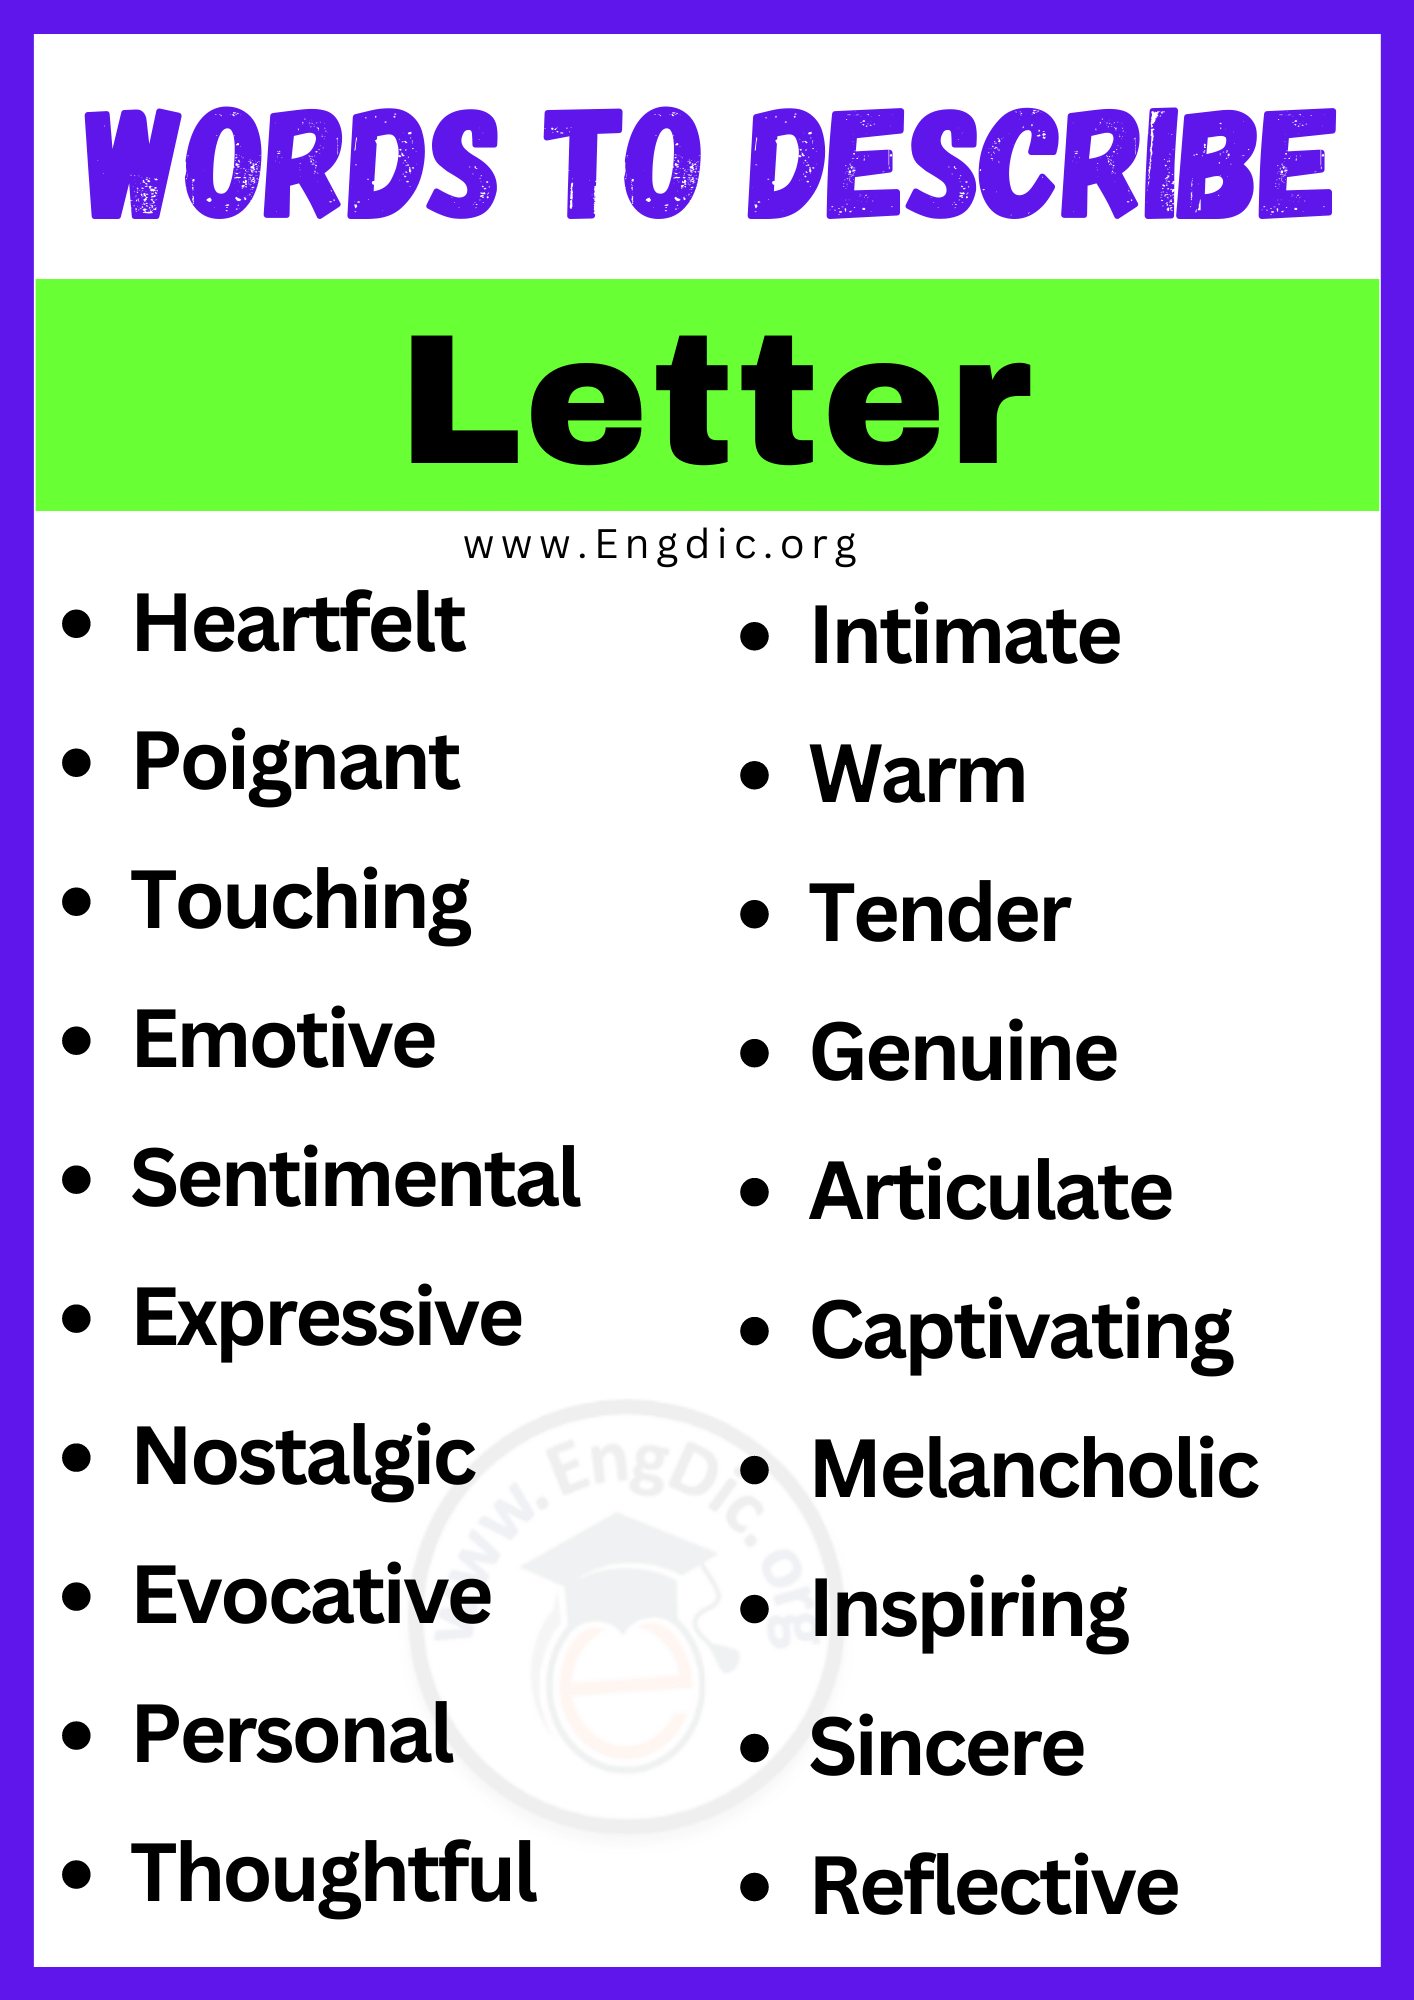 Words to Describe Letter